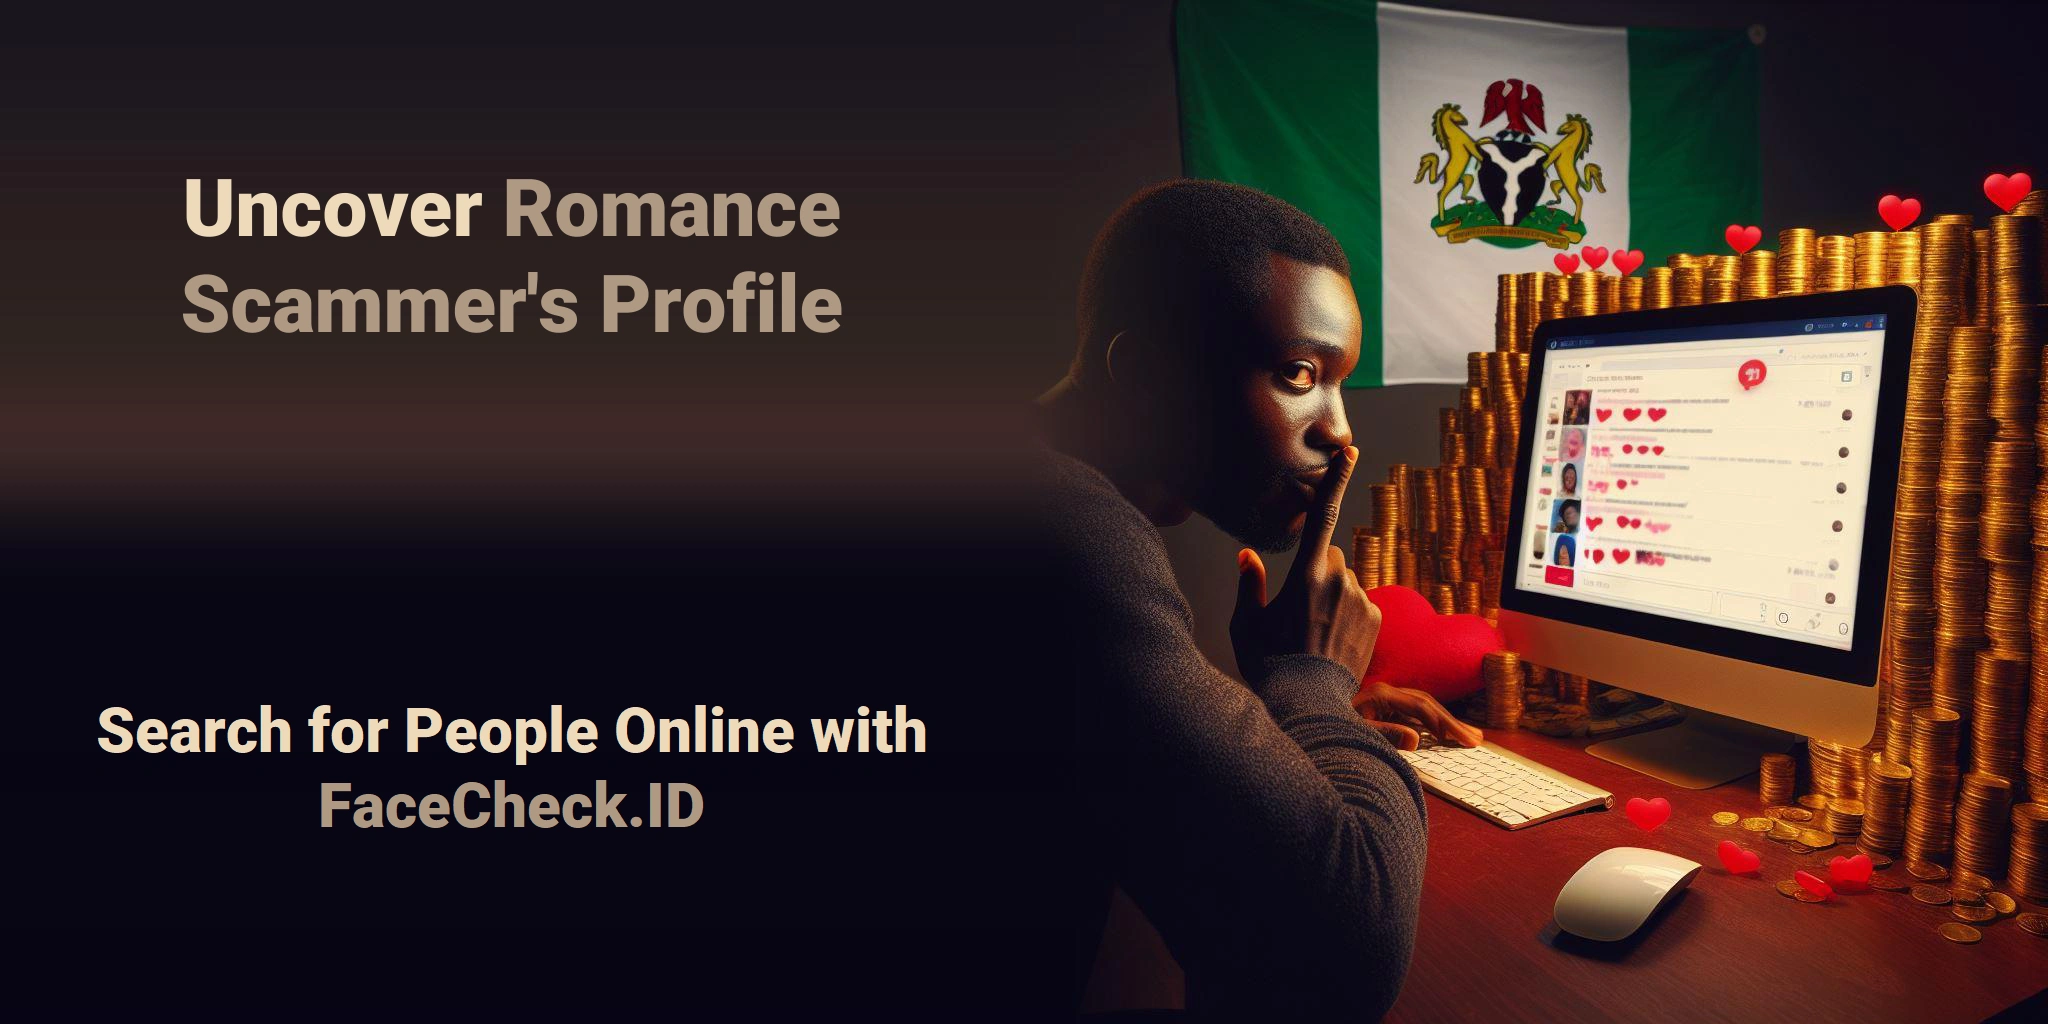 Uncover Romance Scammer's Profile Search for People Online with FaceCheck.ID